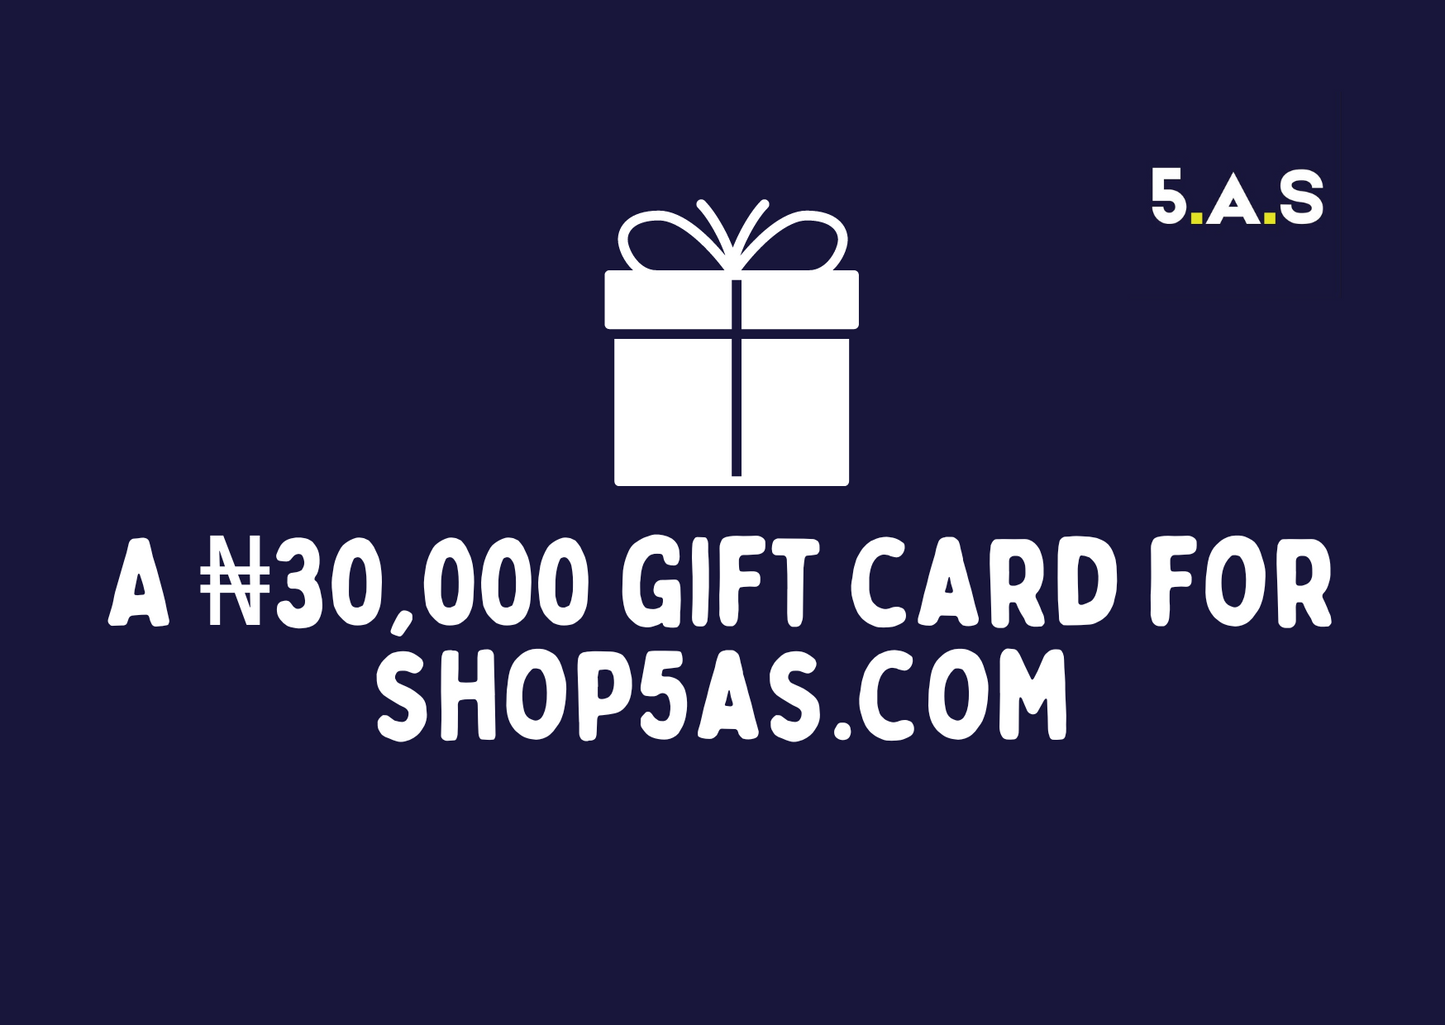 5.A.S. Gift Card